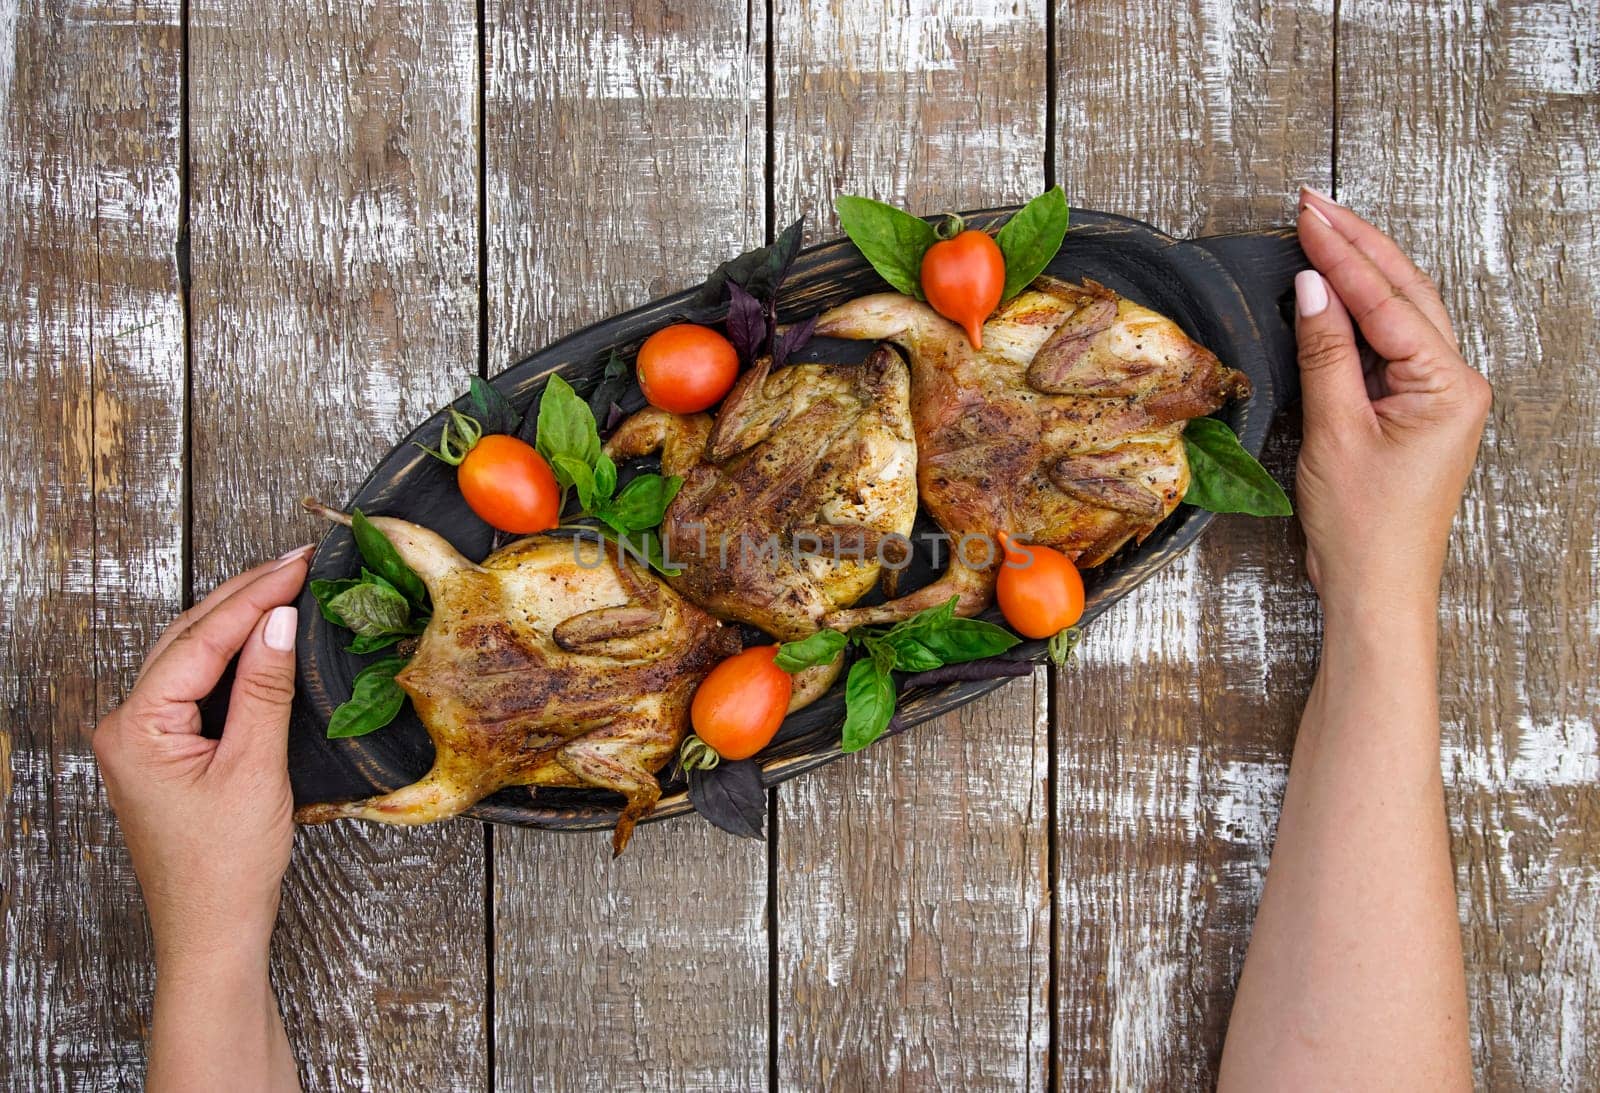 Women's hands hold a wooden dish with grilled quails. Tomatoes and bell peppers are lying on a wooden table.